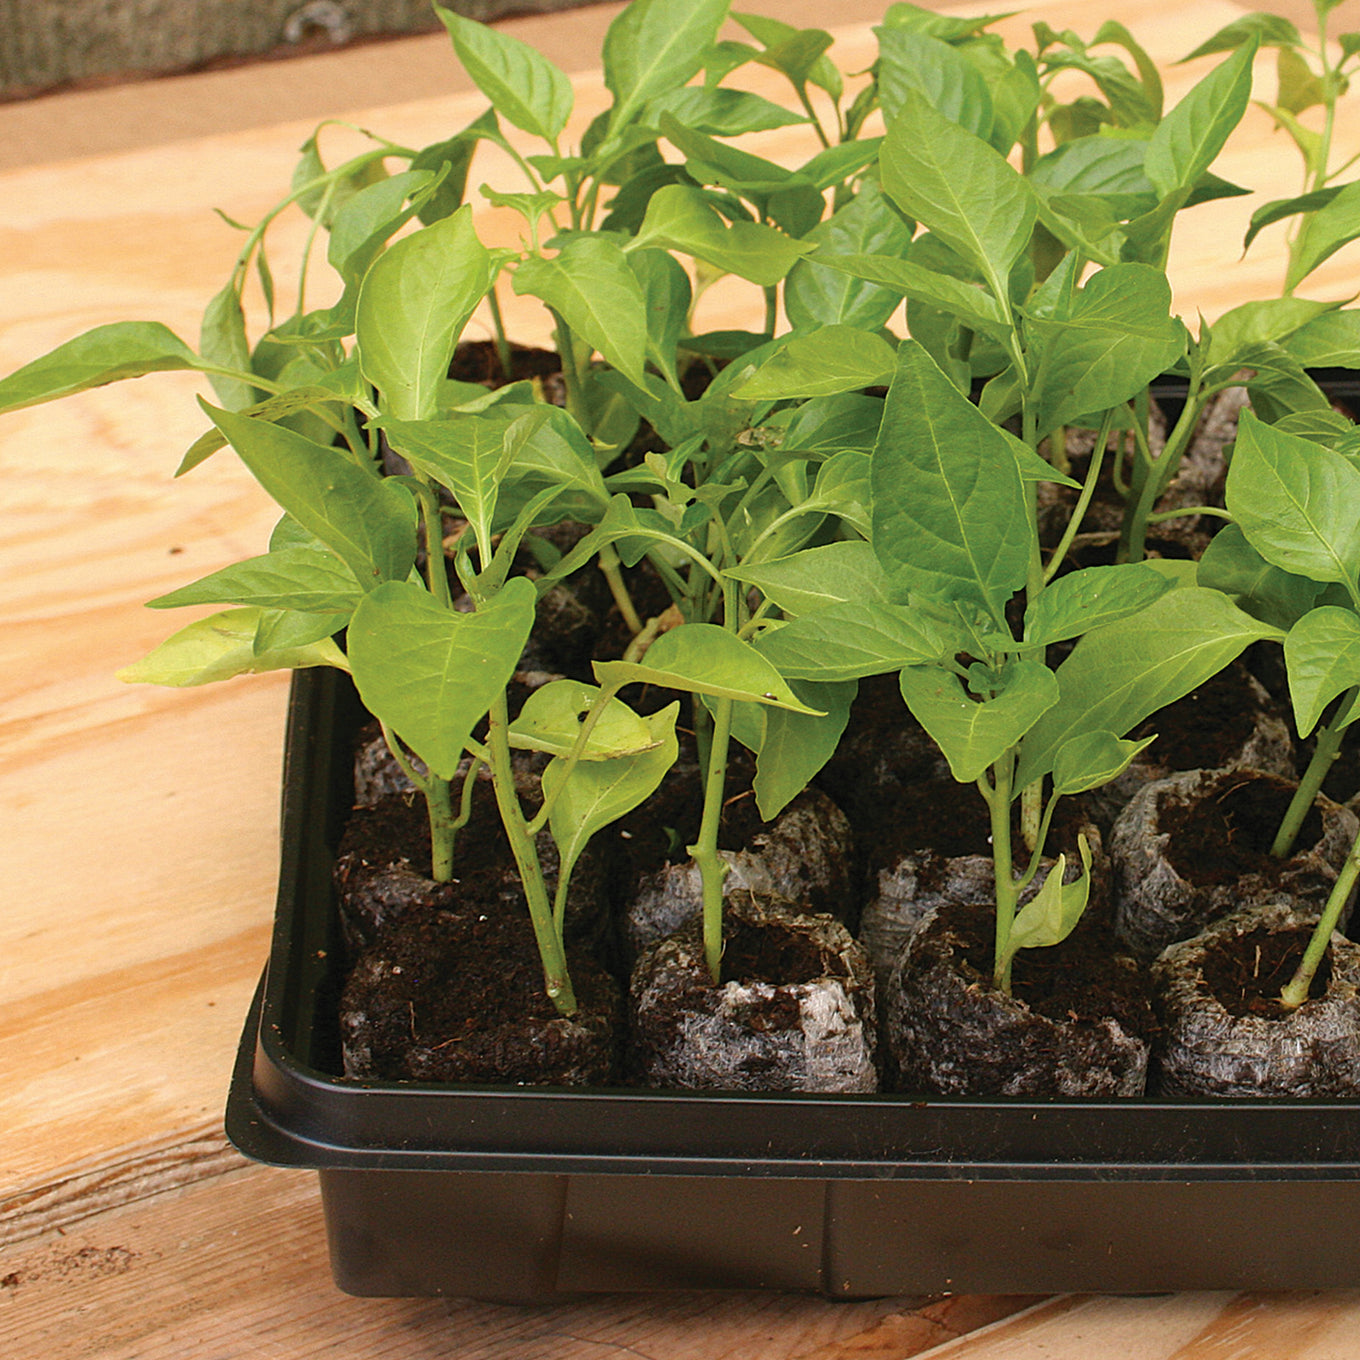 Eventually, you will have a tray full of healthy young plants growing from your peat pellets and you can easily transplant them outdoors or into larger containers for continued growth!